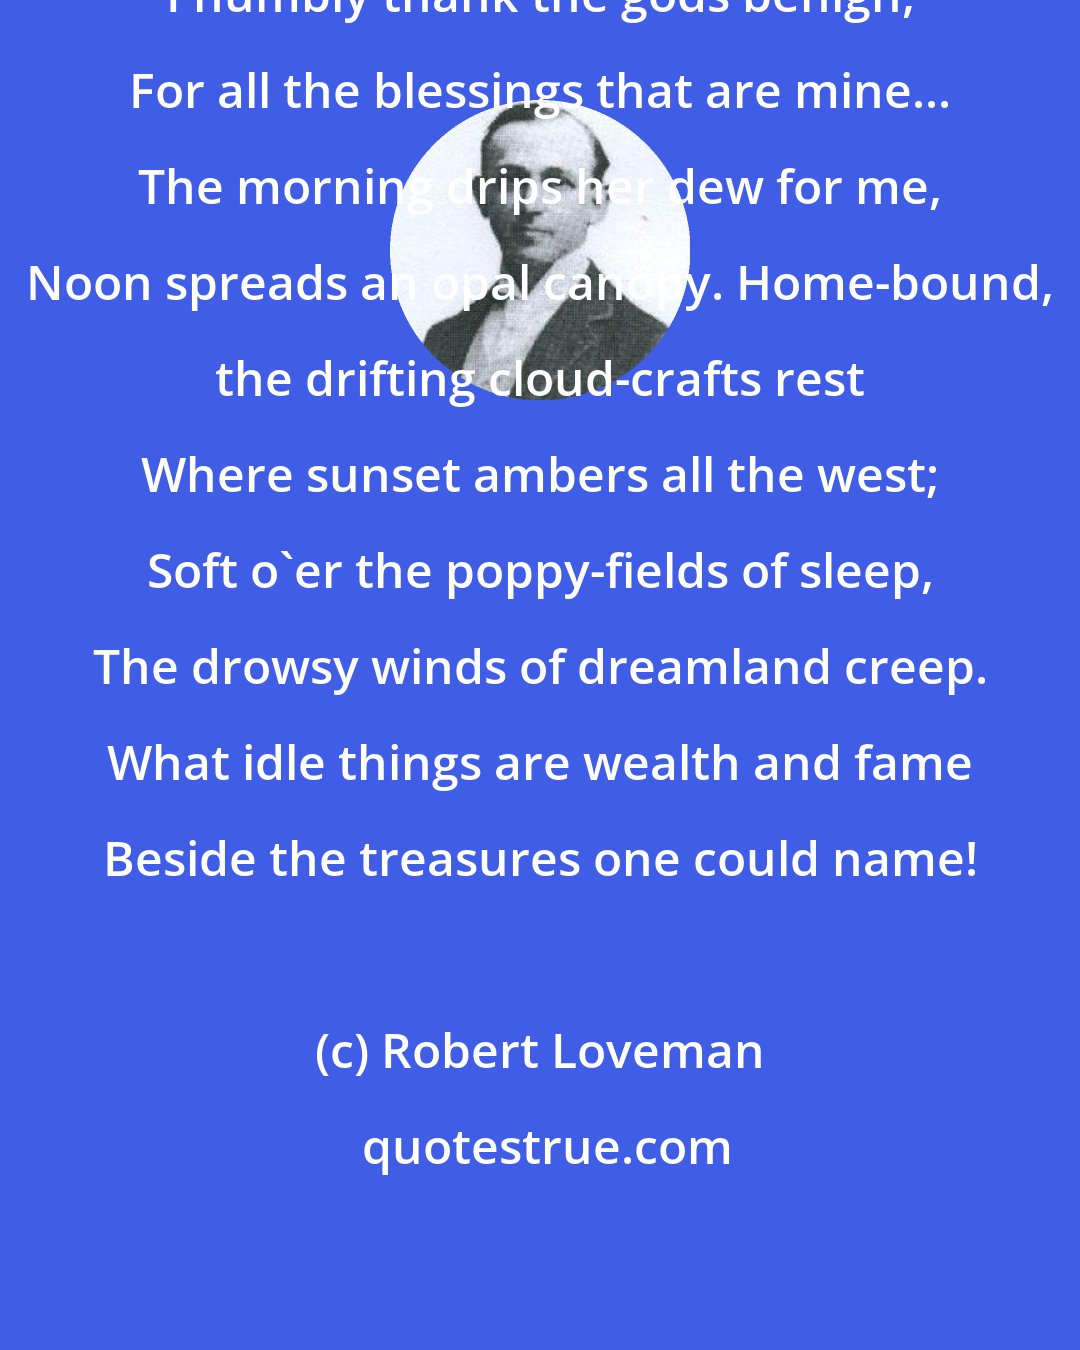 Robert Loveman: I humbly thank the gods benign, For all the blessings that are mine... The morning drips her dew for me, Noon spreads an opal canopy. Home-bound, the drifting cloud-crafts rest Where sunset ambers all the west; Soft o'er the poppy-fields of sleep, The drowsy winds of dreamland creep. What idle things are wealth and fame Beside the treasures one could name!